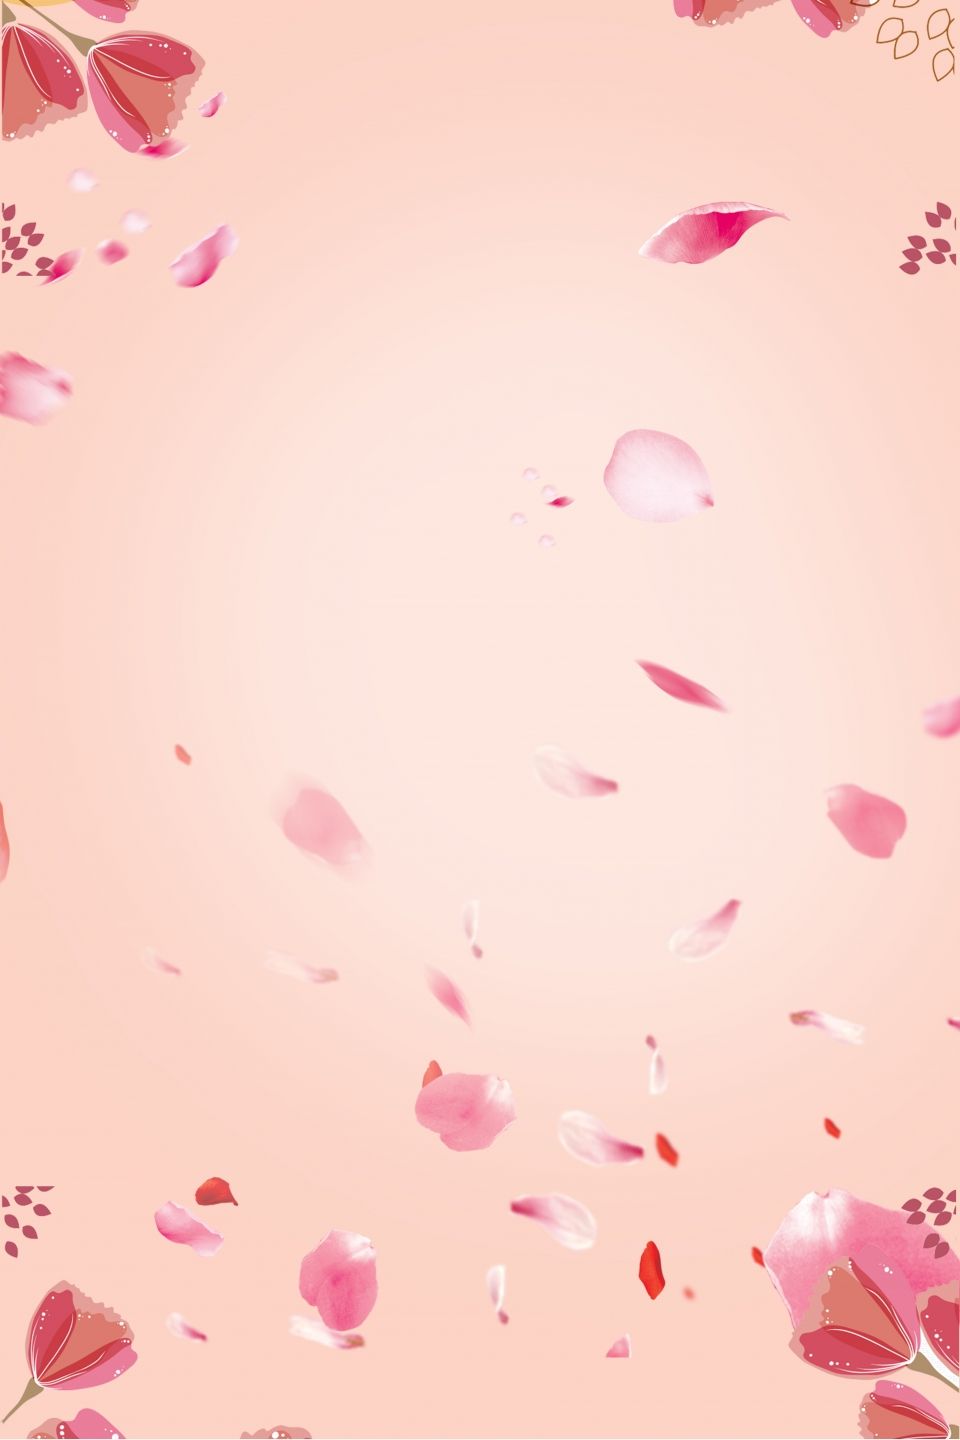 Red Pink Heart Shaped Lip Print Round White Light Petals Advert